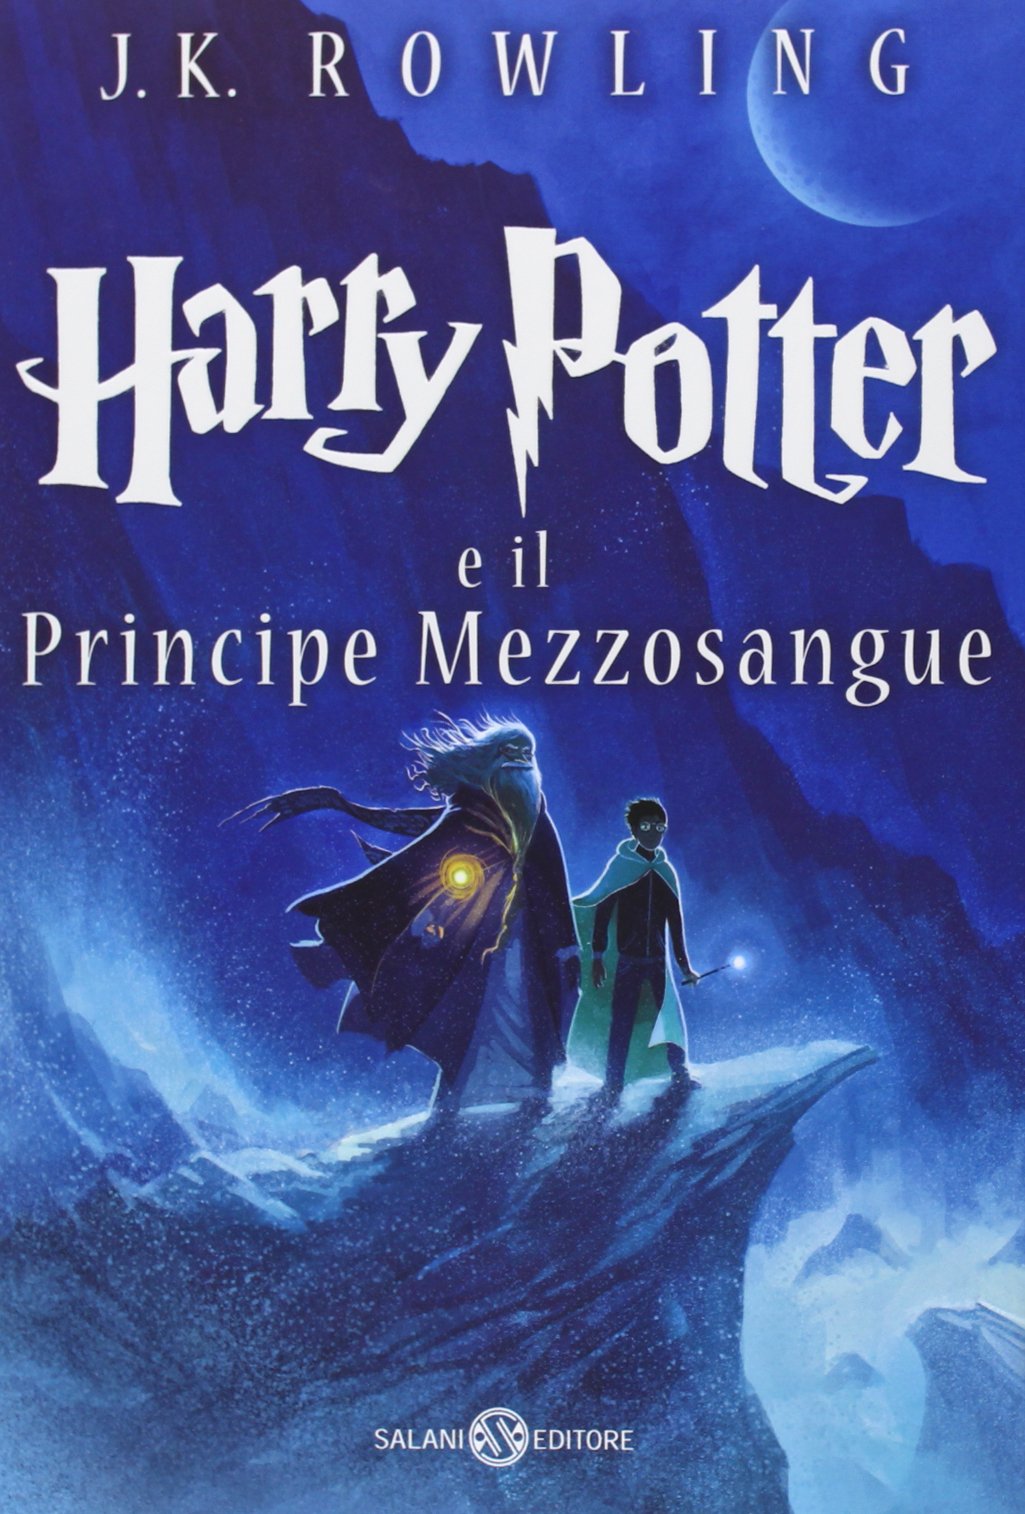 Harry Potter and the Half-Blood Prince Castle Ediotion 2013 – Italian Cover